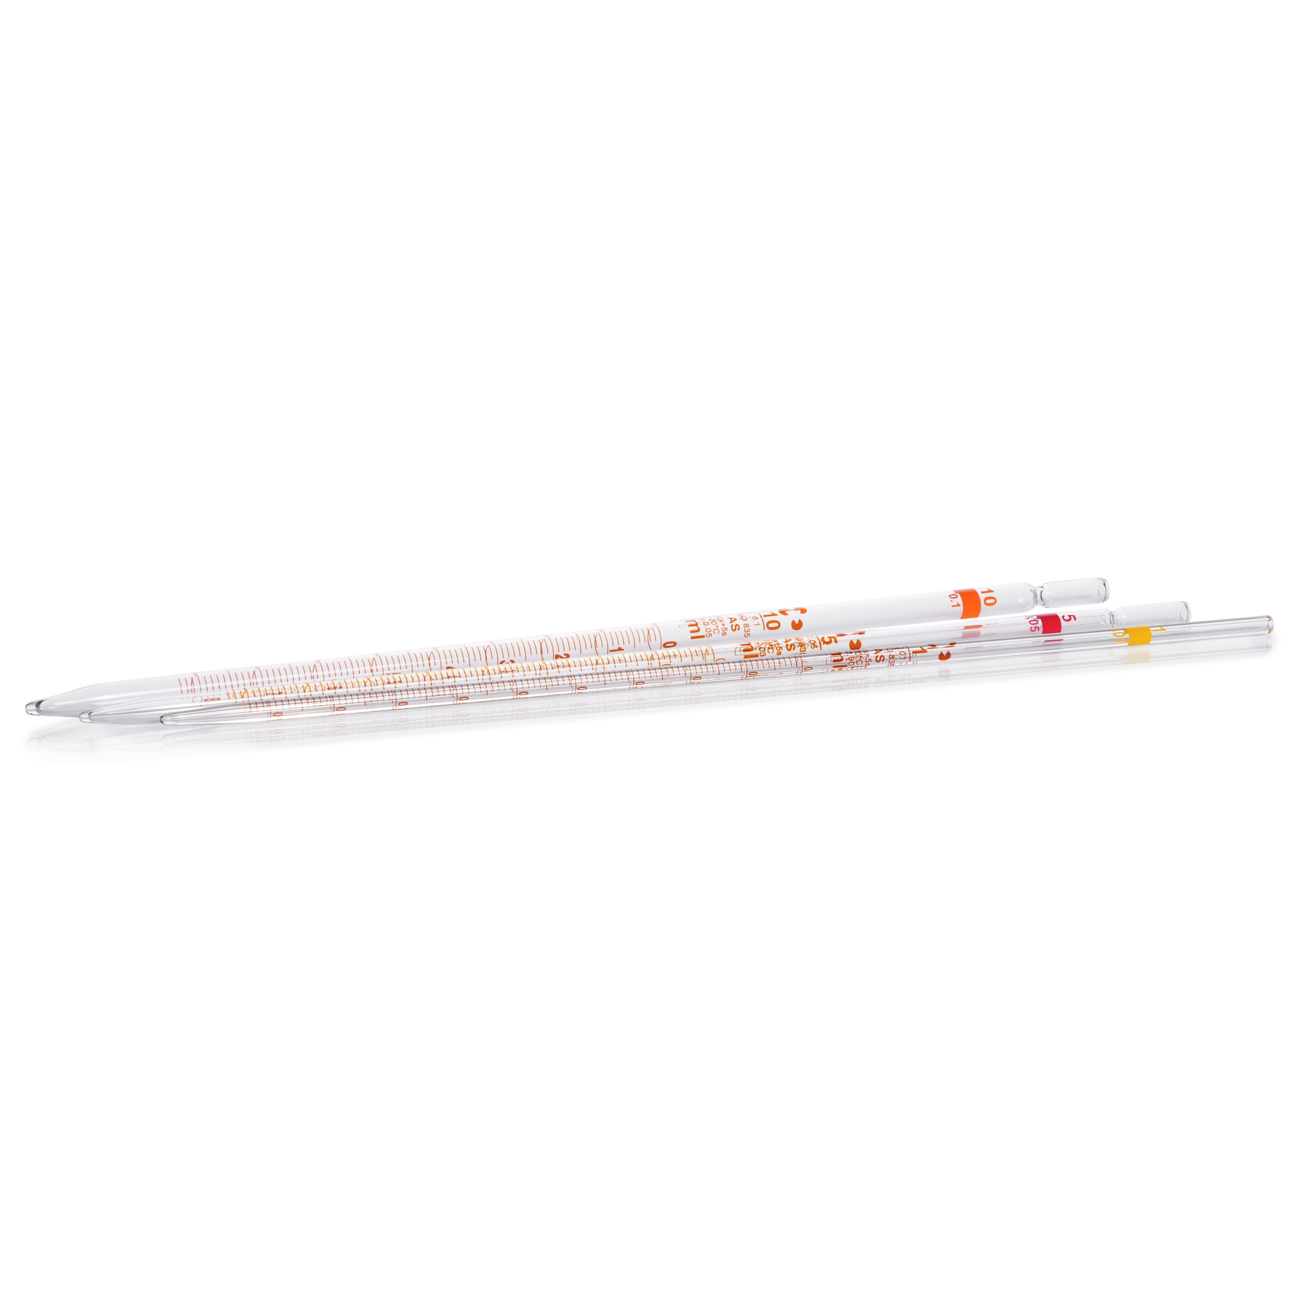 ABML 15221969 Graduated pipette class AS - 2ml